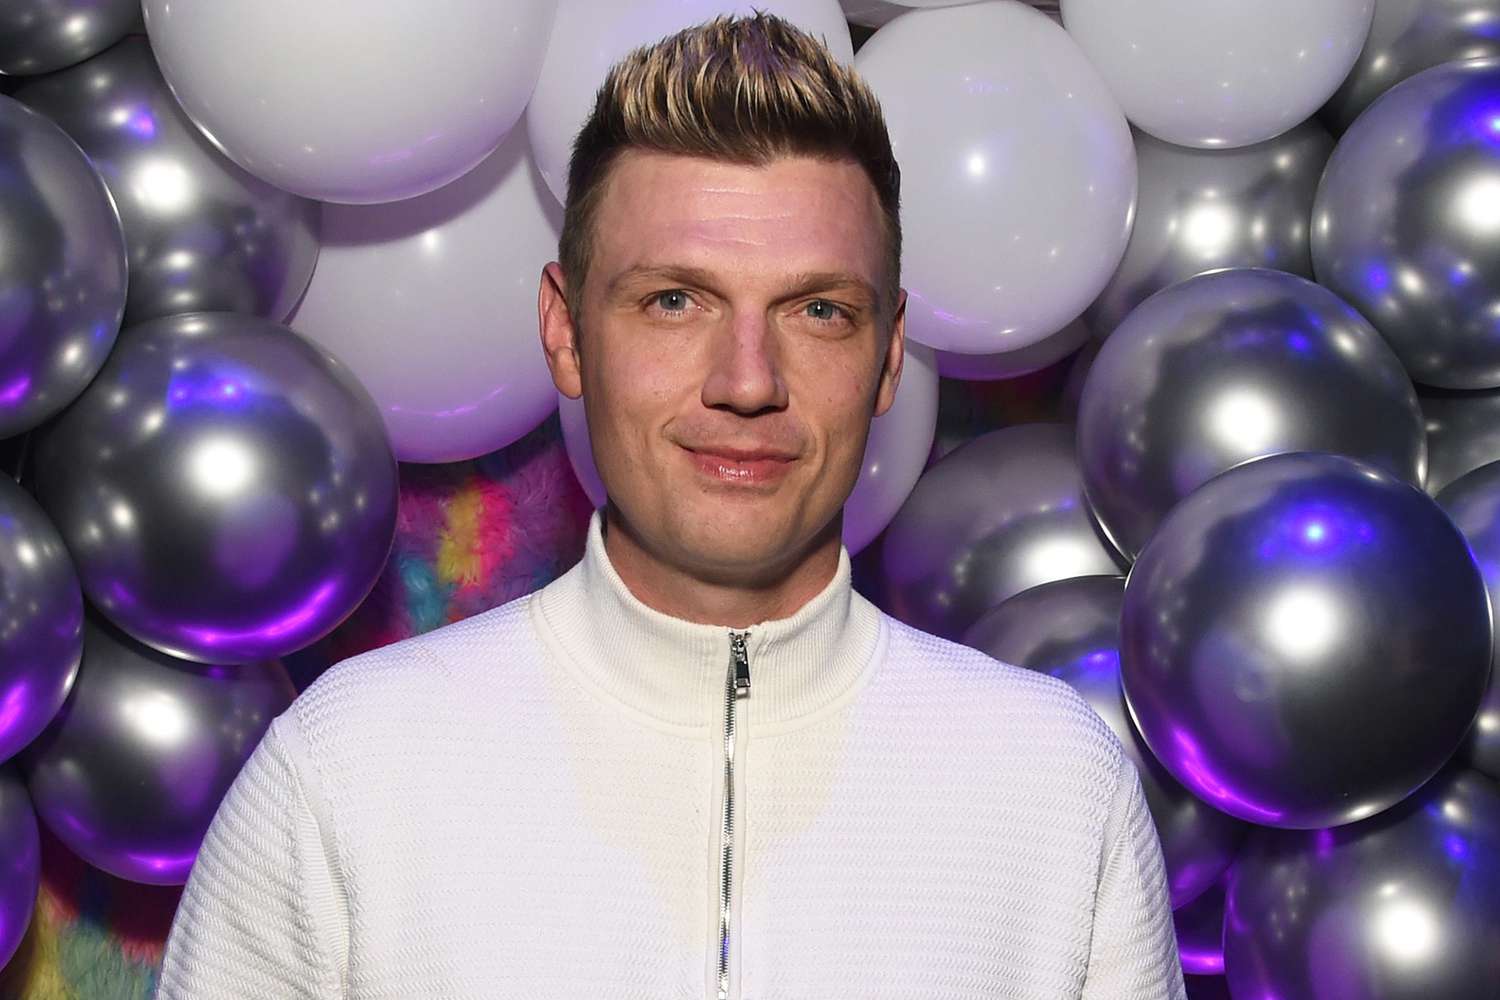 What Has Nick Carter Been Accused of? All the Allegations Against the Backstreet Boys Singer